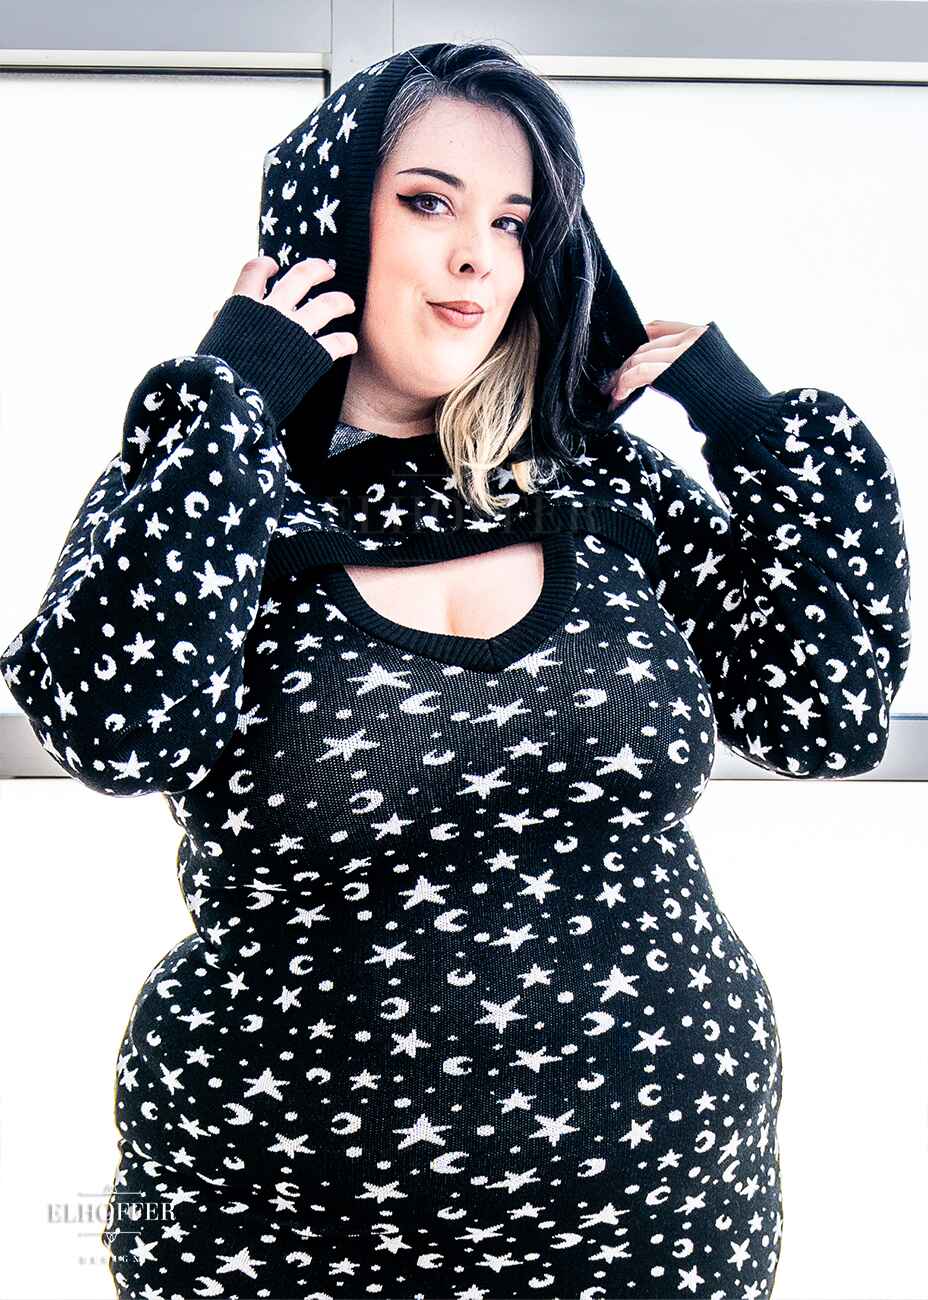 Katie Lynn, a fair skinned 2xl model with black and white hair, is wearing a black hooded super cropped knit shrug sweater with a white star and moon pattern, long billowing sleeves, and thumbholes, paired with a matching fitted knee length bodycon dress.